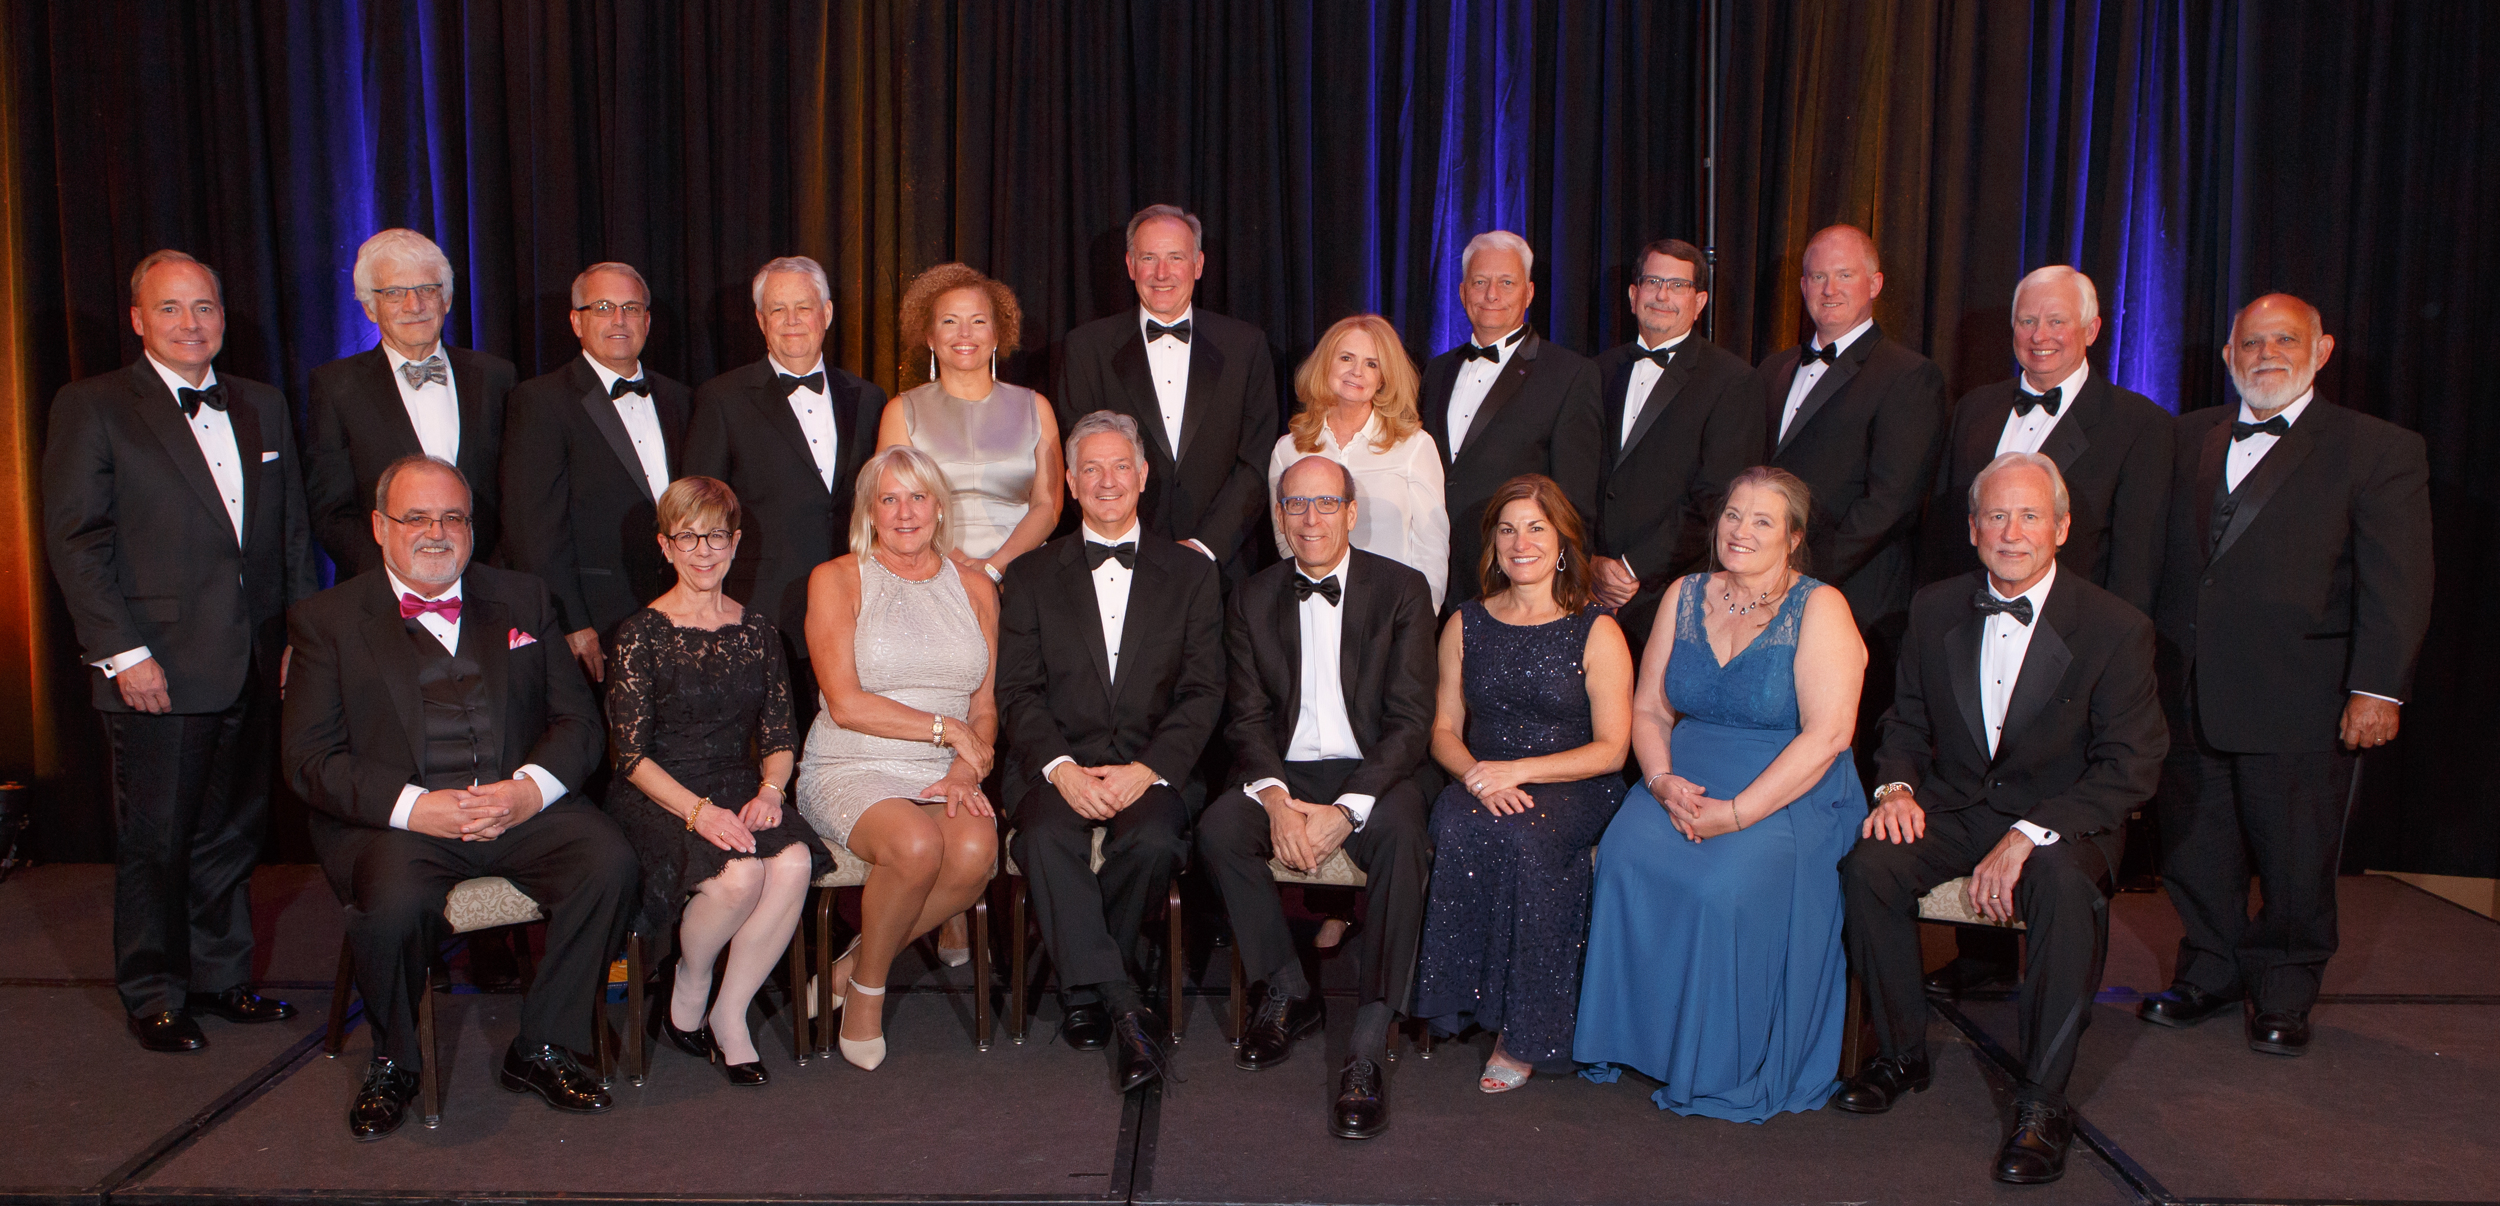 Class of 2017.  The 51st Annual Cable TV Pioneers Banquet, at the Brown Palace Hotel and Spa in Denver, Colorado, on Tuesday, Oct. 17, 2017.
Photo Steve Peterson